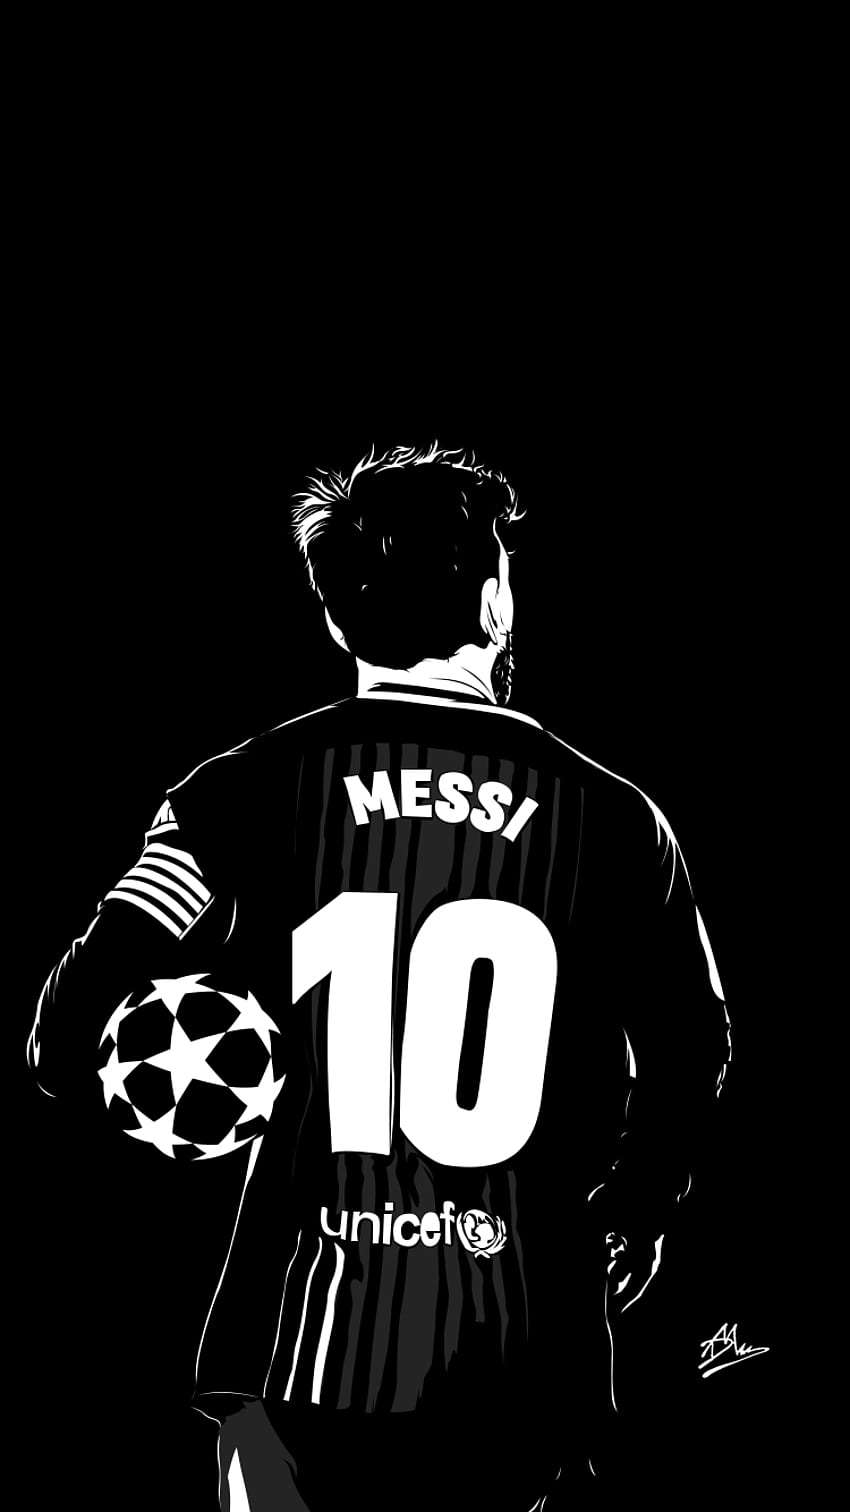 Messi by Dlanid on Dribbble